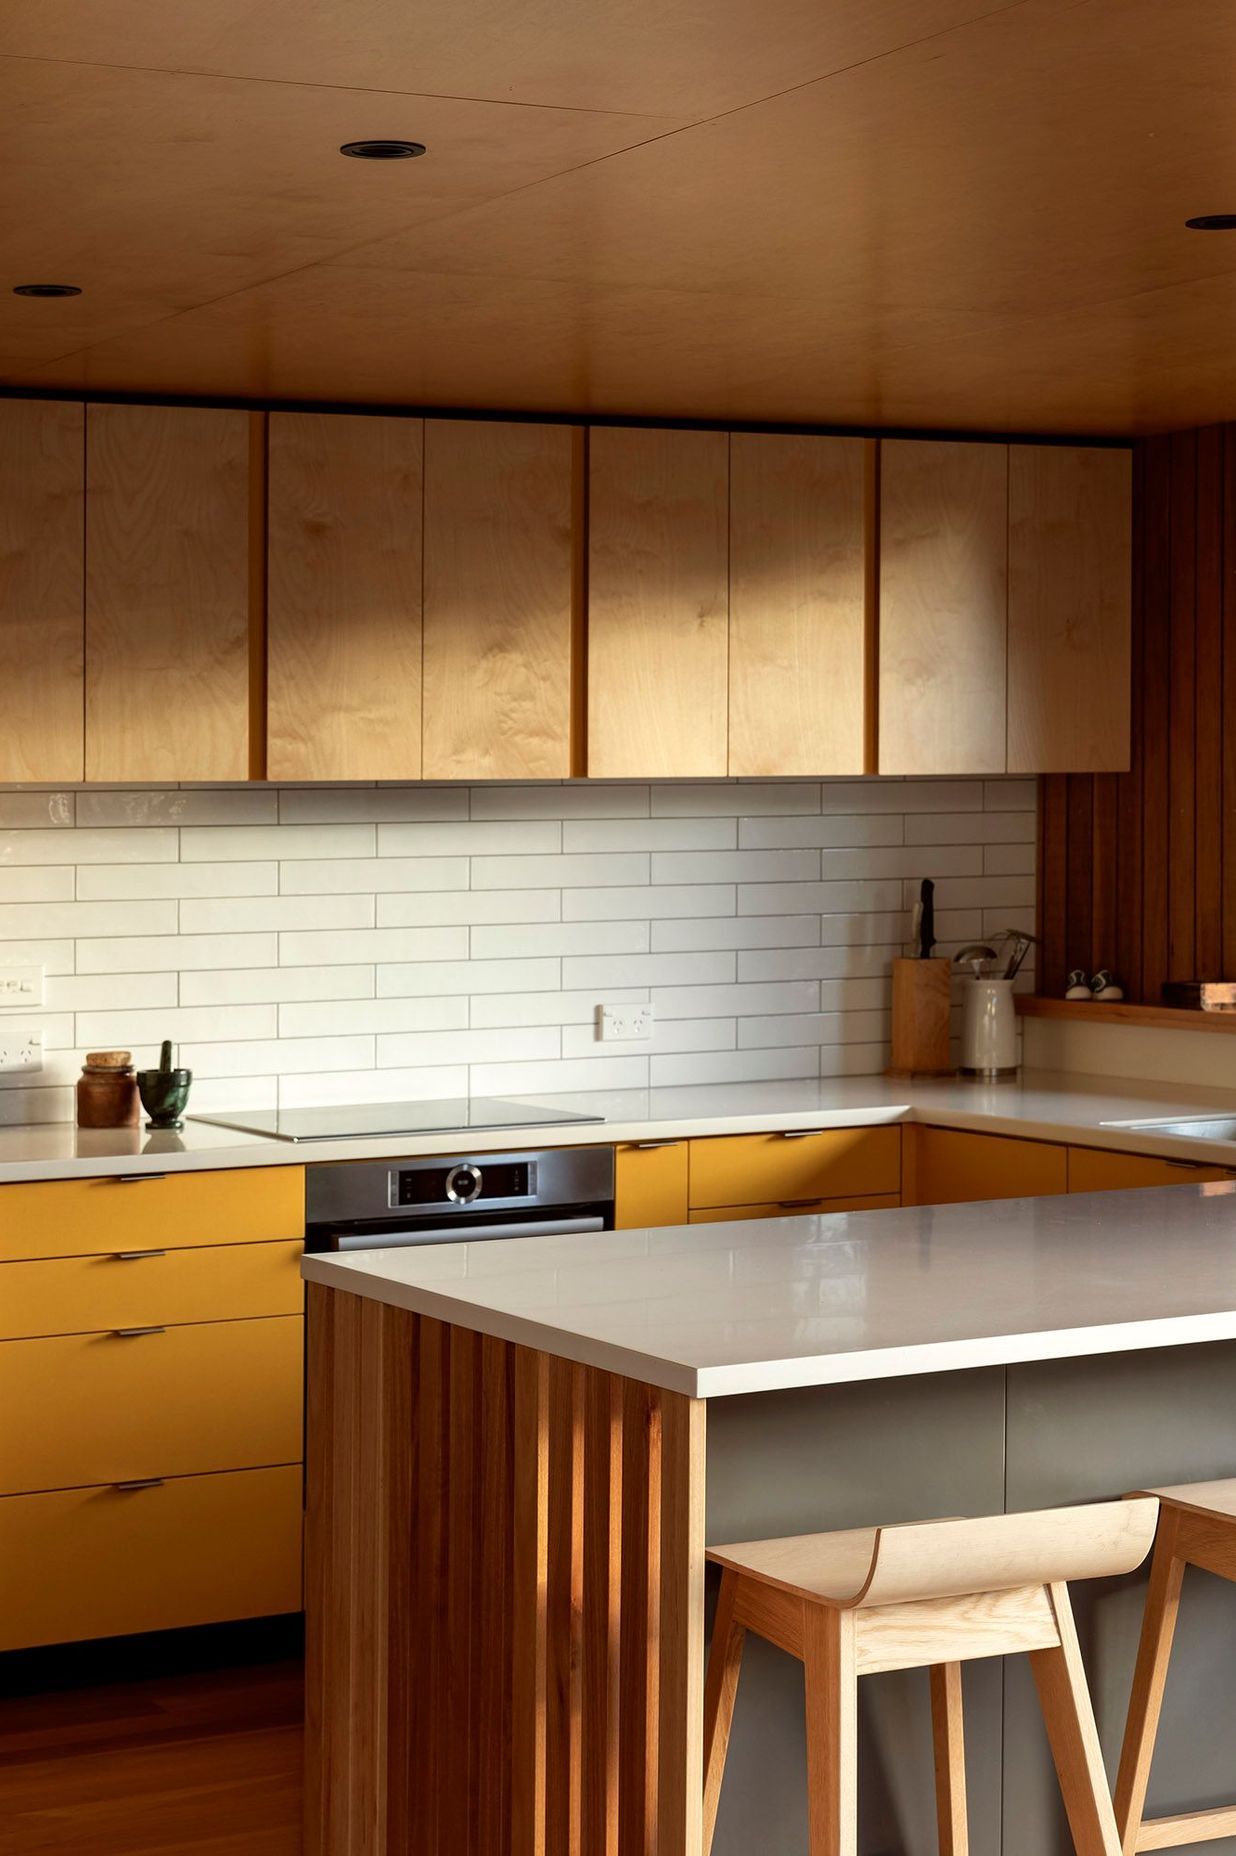 Birch ply cabinetry is used in the kitchen with accents of yellow laminate and Australian hardwood flooring.